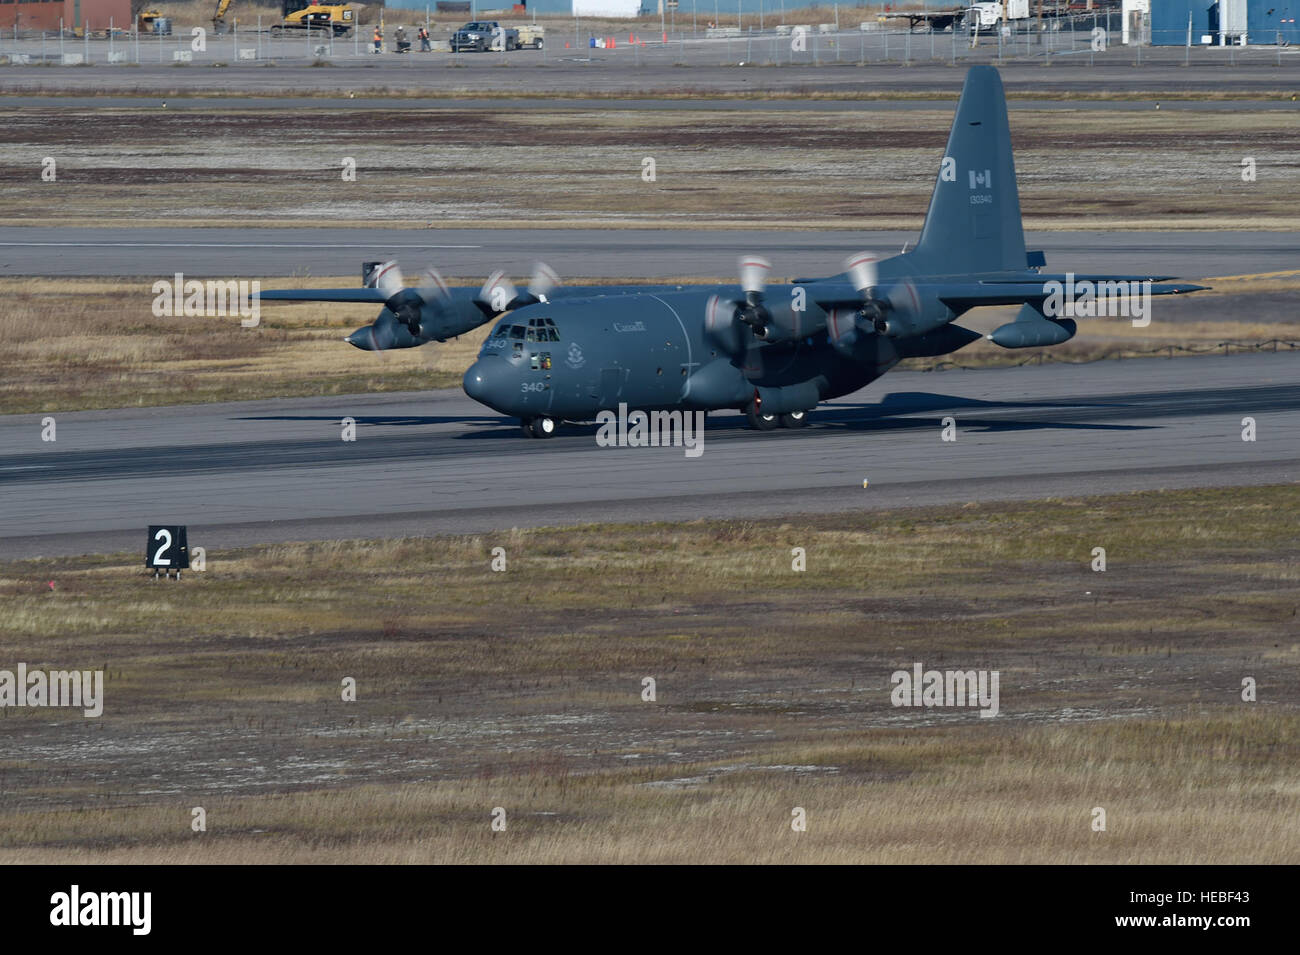 A Royal Canadian Air Force CC-130 Hercules from the 435 Transport and Rescue Squadron takes off during from 5 Wing Goose Bay, Newfoundland and Labrador, Canada, Oct. 22, 2014, to provide air-to-air refuelling during Vigilant Shield 15.  Vigilant Shield field training exercise is a bi-national NORAD Command exercise which provides realistic training and practice for American and Canadian forces in support of respective national strategy for North America’s defense. NORAD ensures U.S. and Canadian air sovereignty through a network of alert fighters, tankers, airborne early warning aircraft, and  Stock Photo